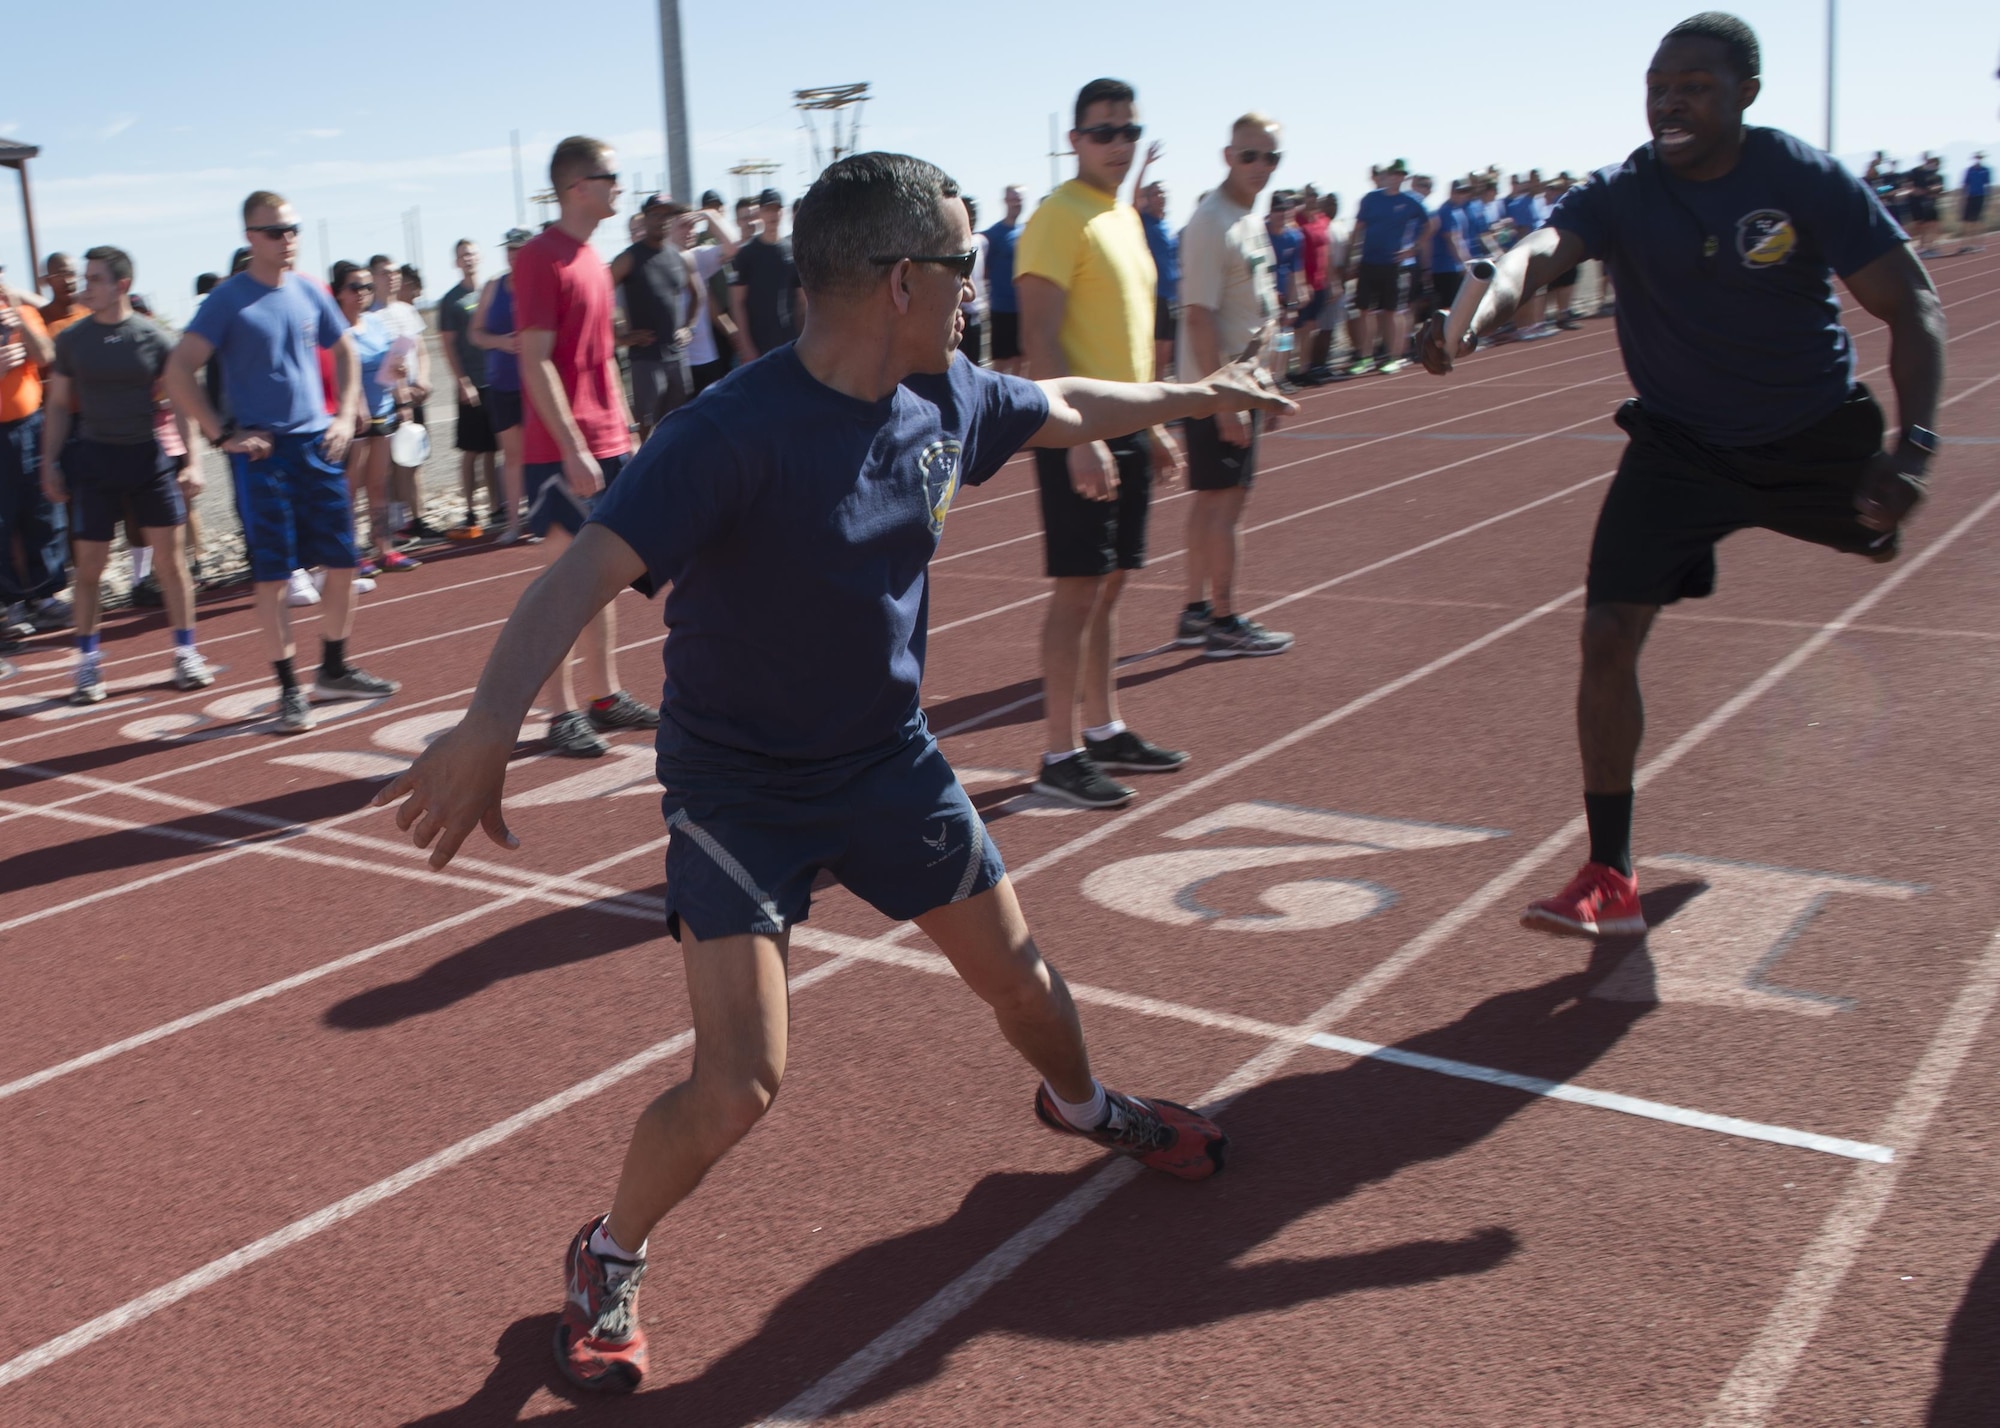 An Airman hands off a baton during a one-mile relay during the 49th Wing Sports Day, March 17, 2017 at Holloman Air Force Base, N.M. Sports Day included a number of events, such as basketball, dodgeball, football, and many more. The day ended with a one-mile relay and awards presentation. (U.S. Air Force photo by Senior Airman Emily Kenney)  